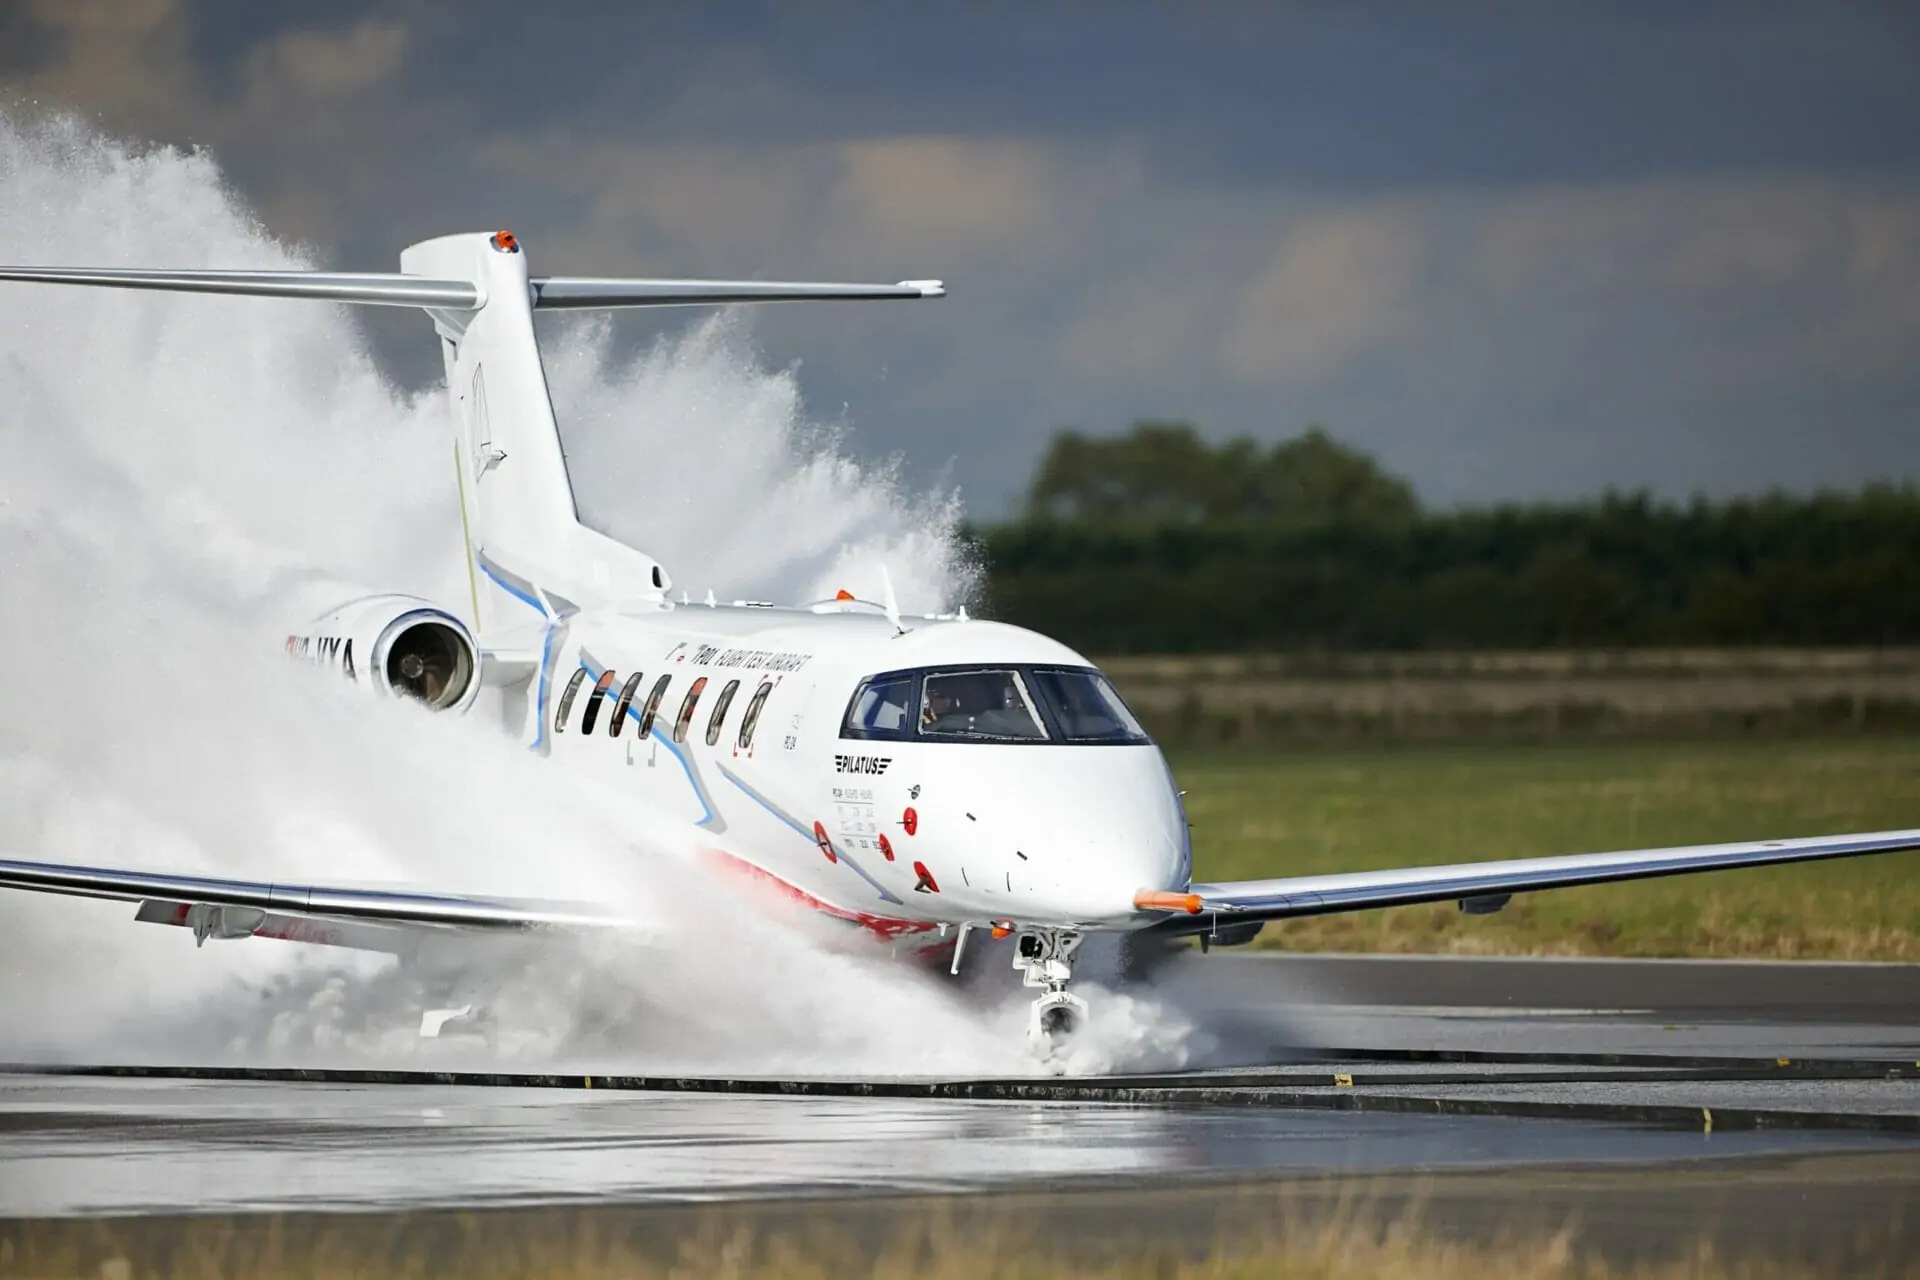 Pilatus PC-24 water ingestion test - are private jets safer than commercial?